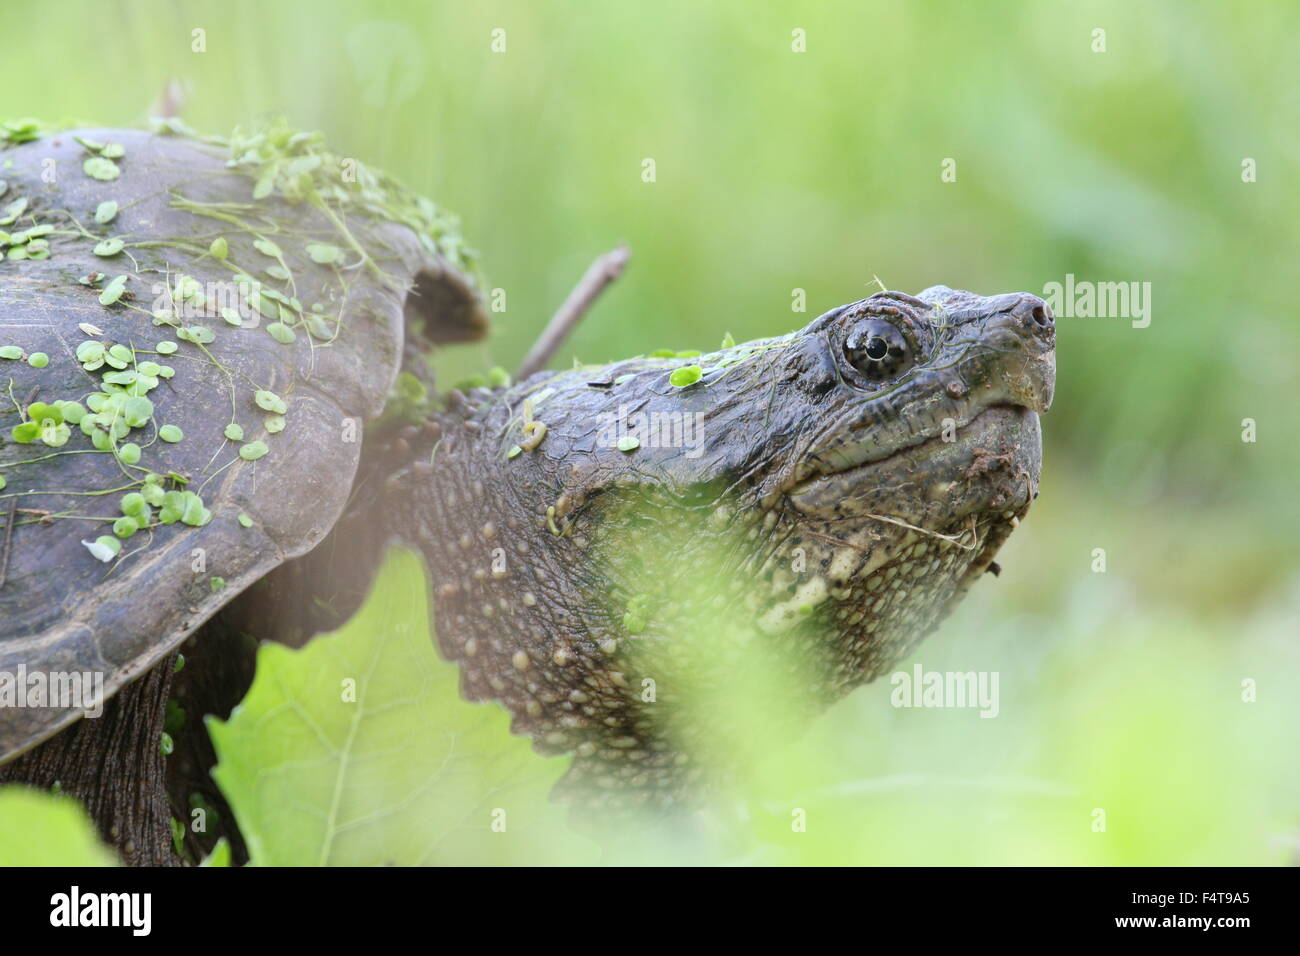 Snapping turtle with leaves and algae. Stock Photo